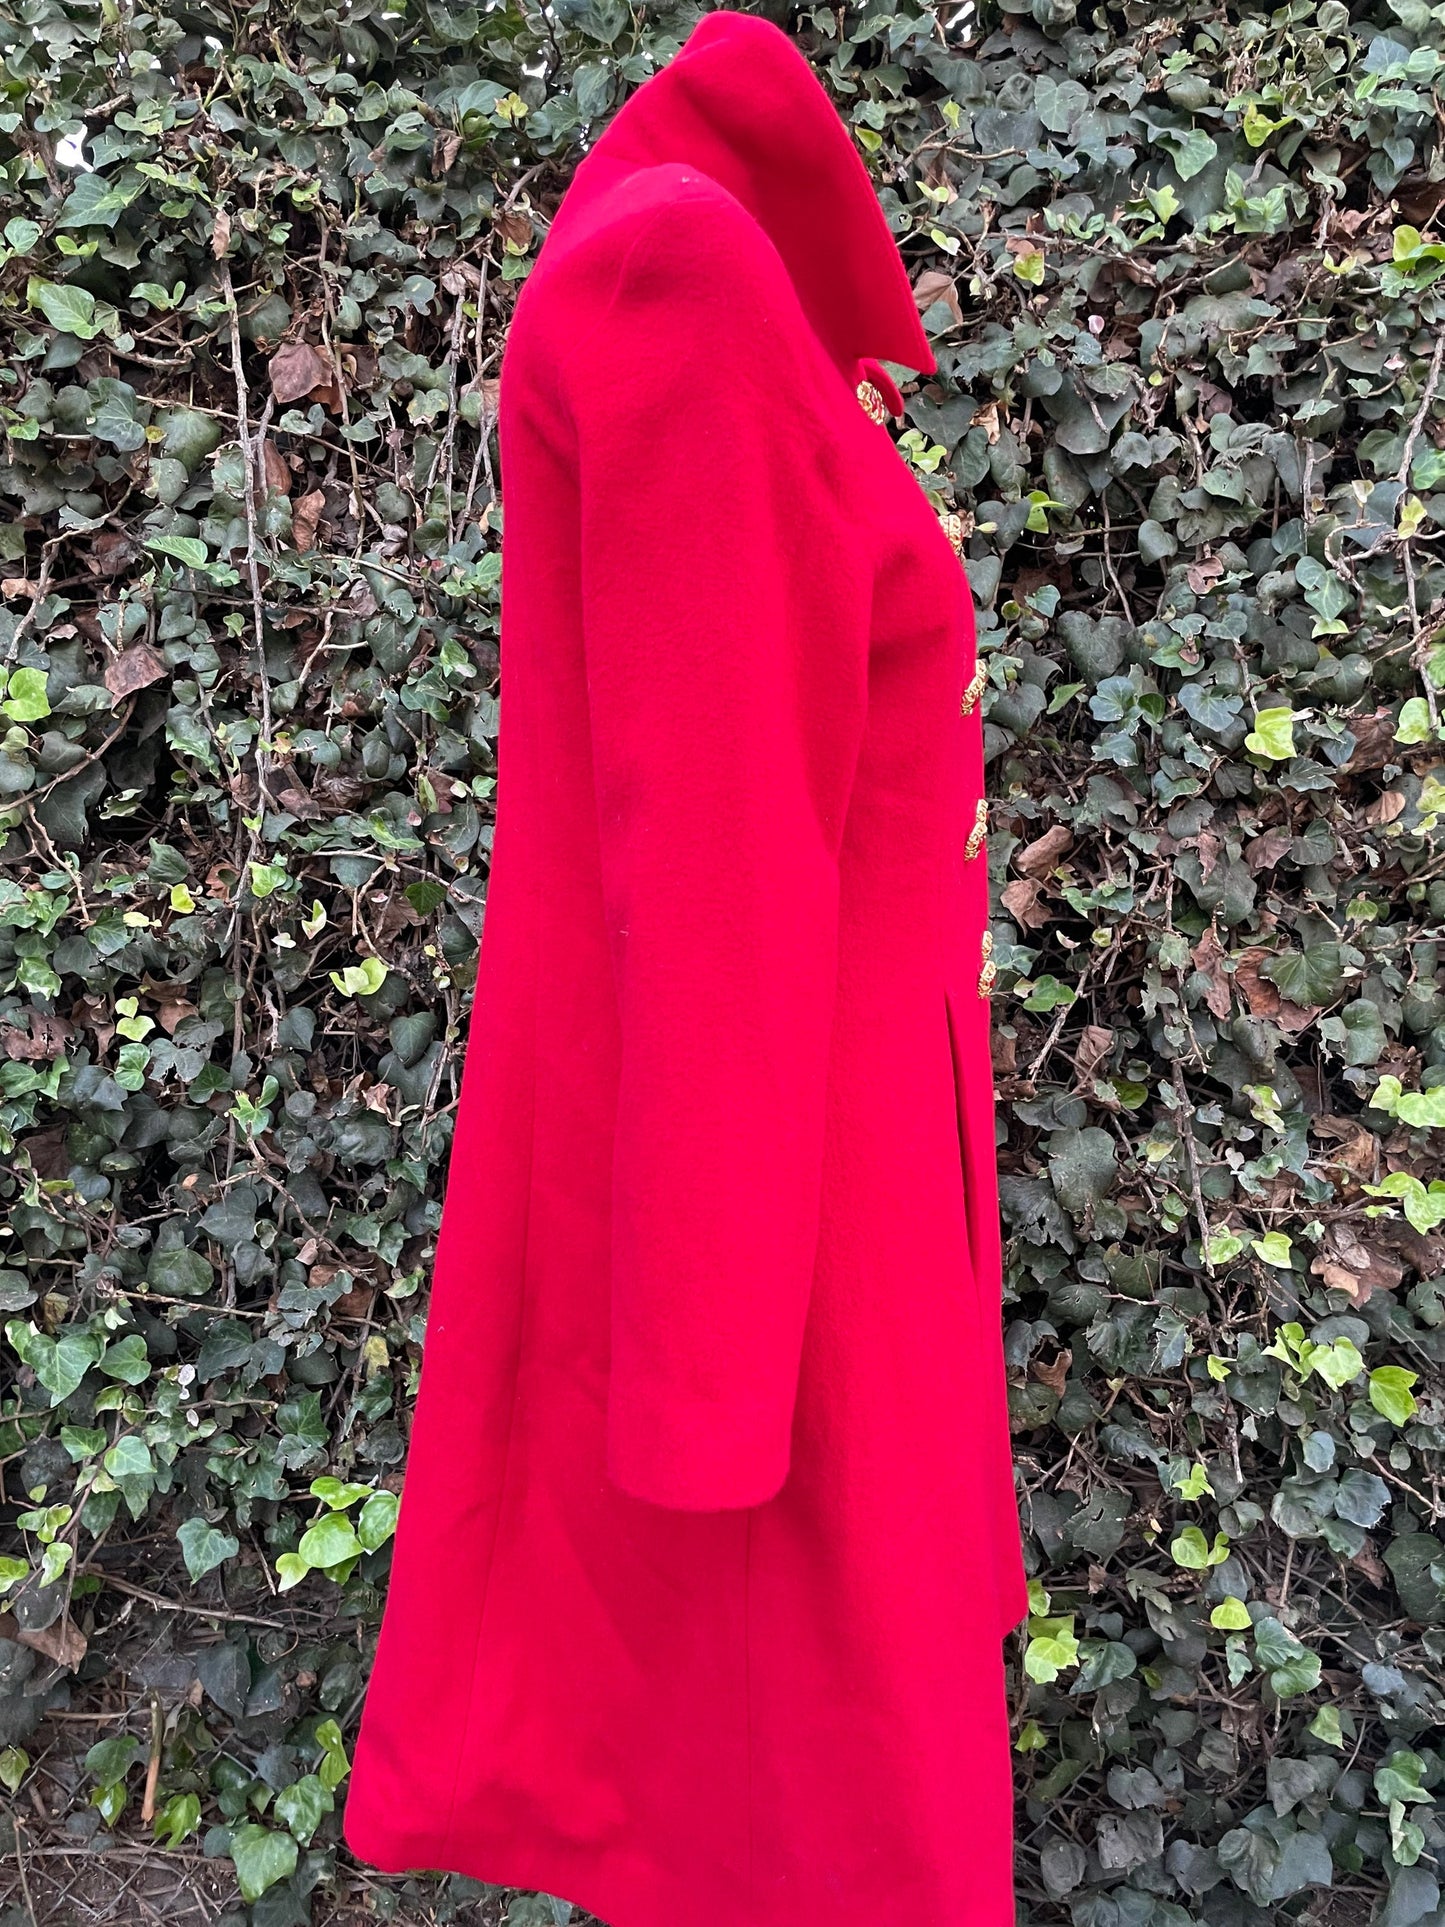 Vintage Red Wool Jewel Button Red Long Peacoat